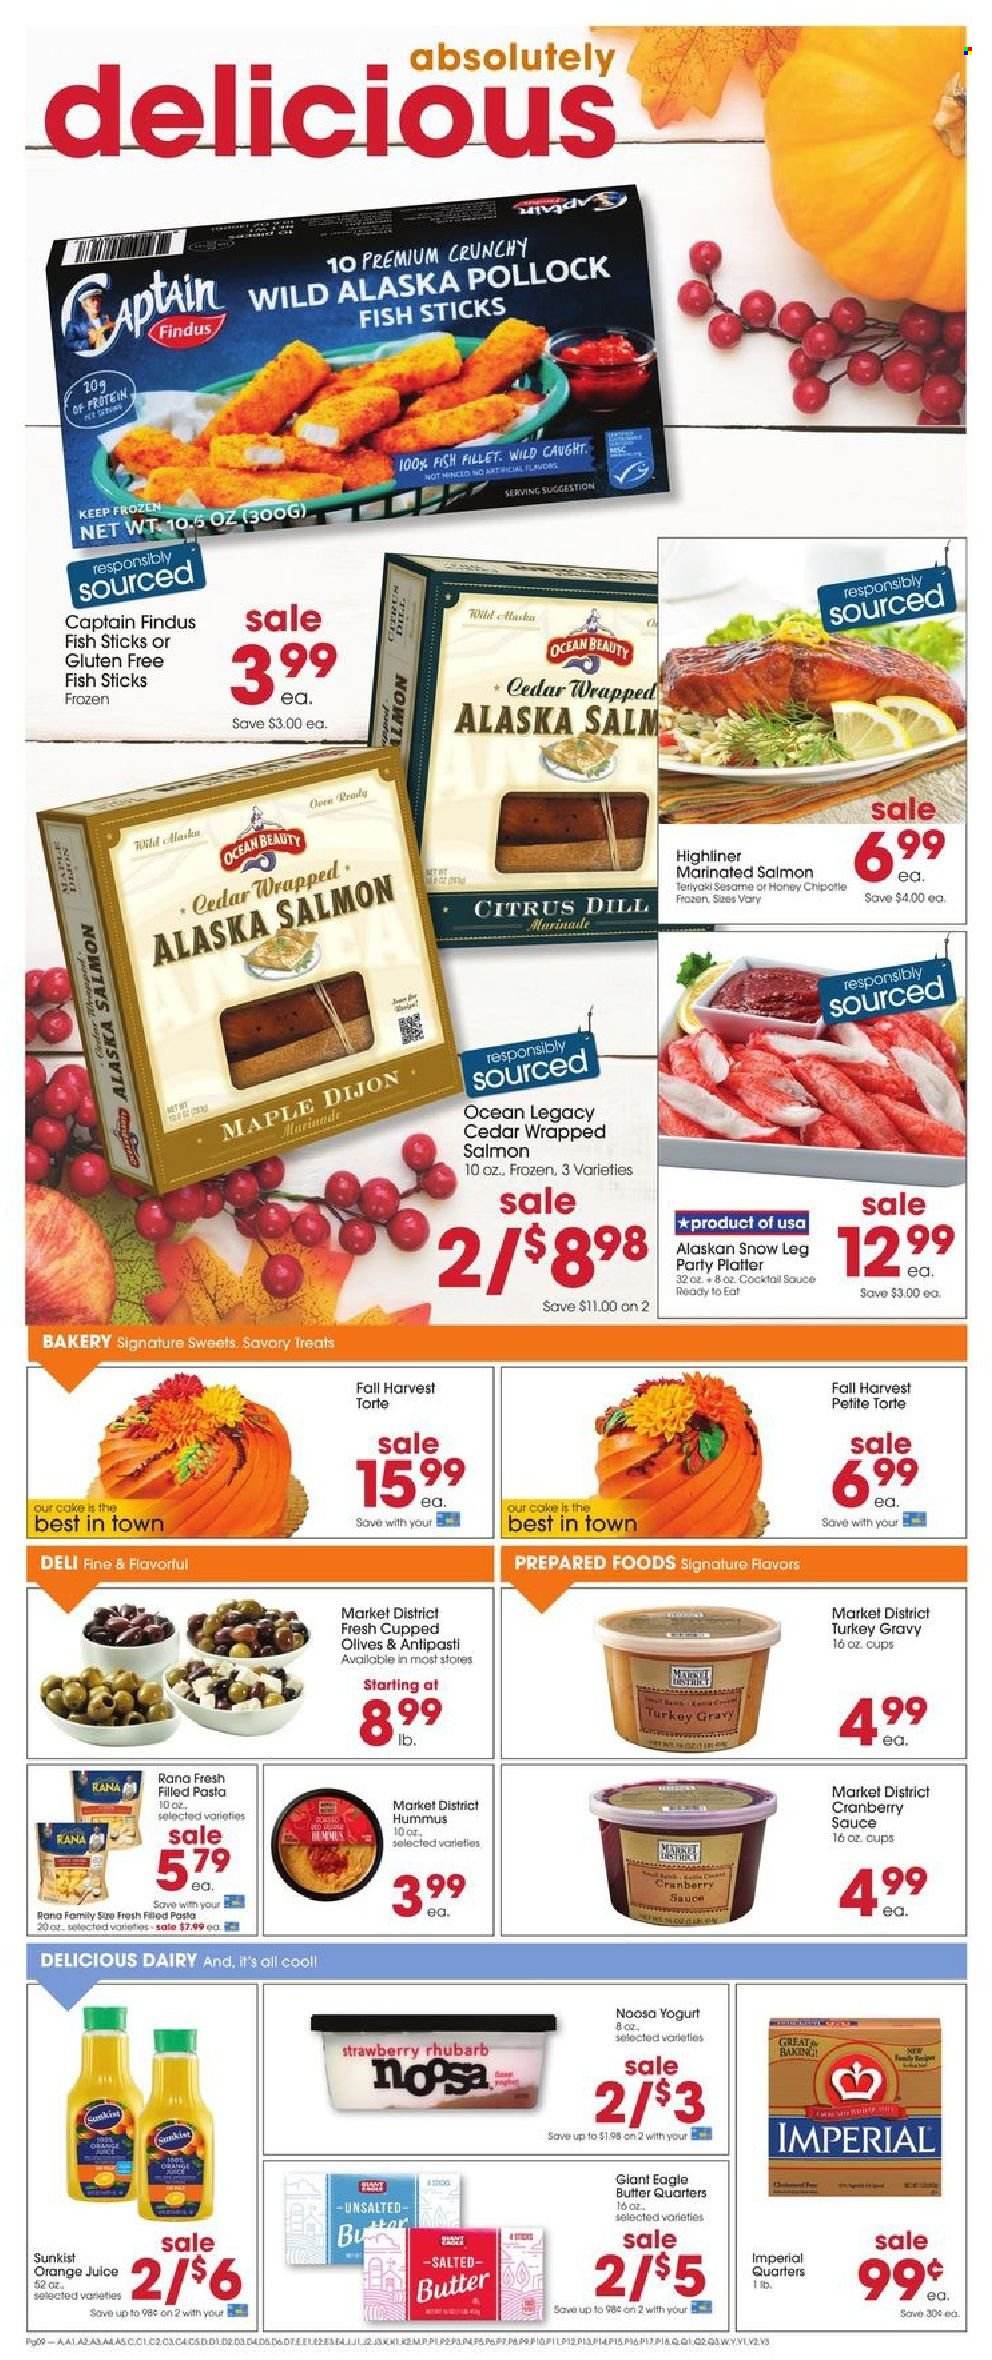 thumbnail - Giant Eagle Flyer - 11/18/2021 - 11/24/2021 - Sales products - cake, rhubarb, fish fillets, salmon, pollock, fish, fish fingers, fish sticks, pasta, sauce, Rana, filled pasta, hummus, yoghurt, butter, olives, dill, cocktail sauce, turkey gravy, marinade, cranberry sauce, honey, Coca-Cola, orange juice, juice, cup. Page 8.